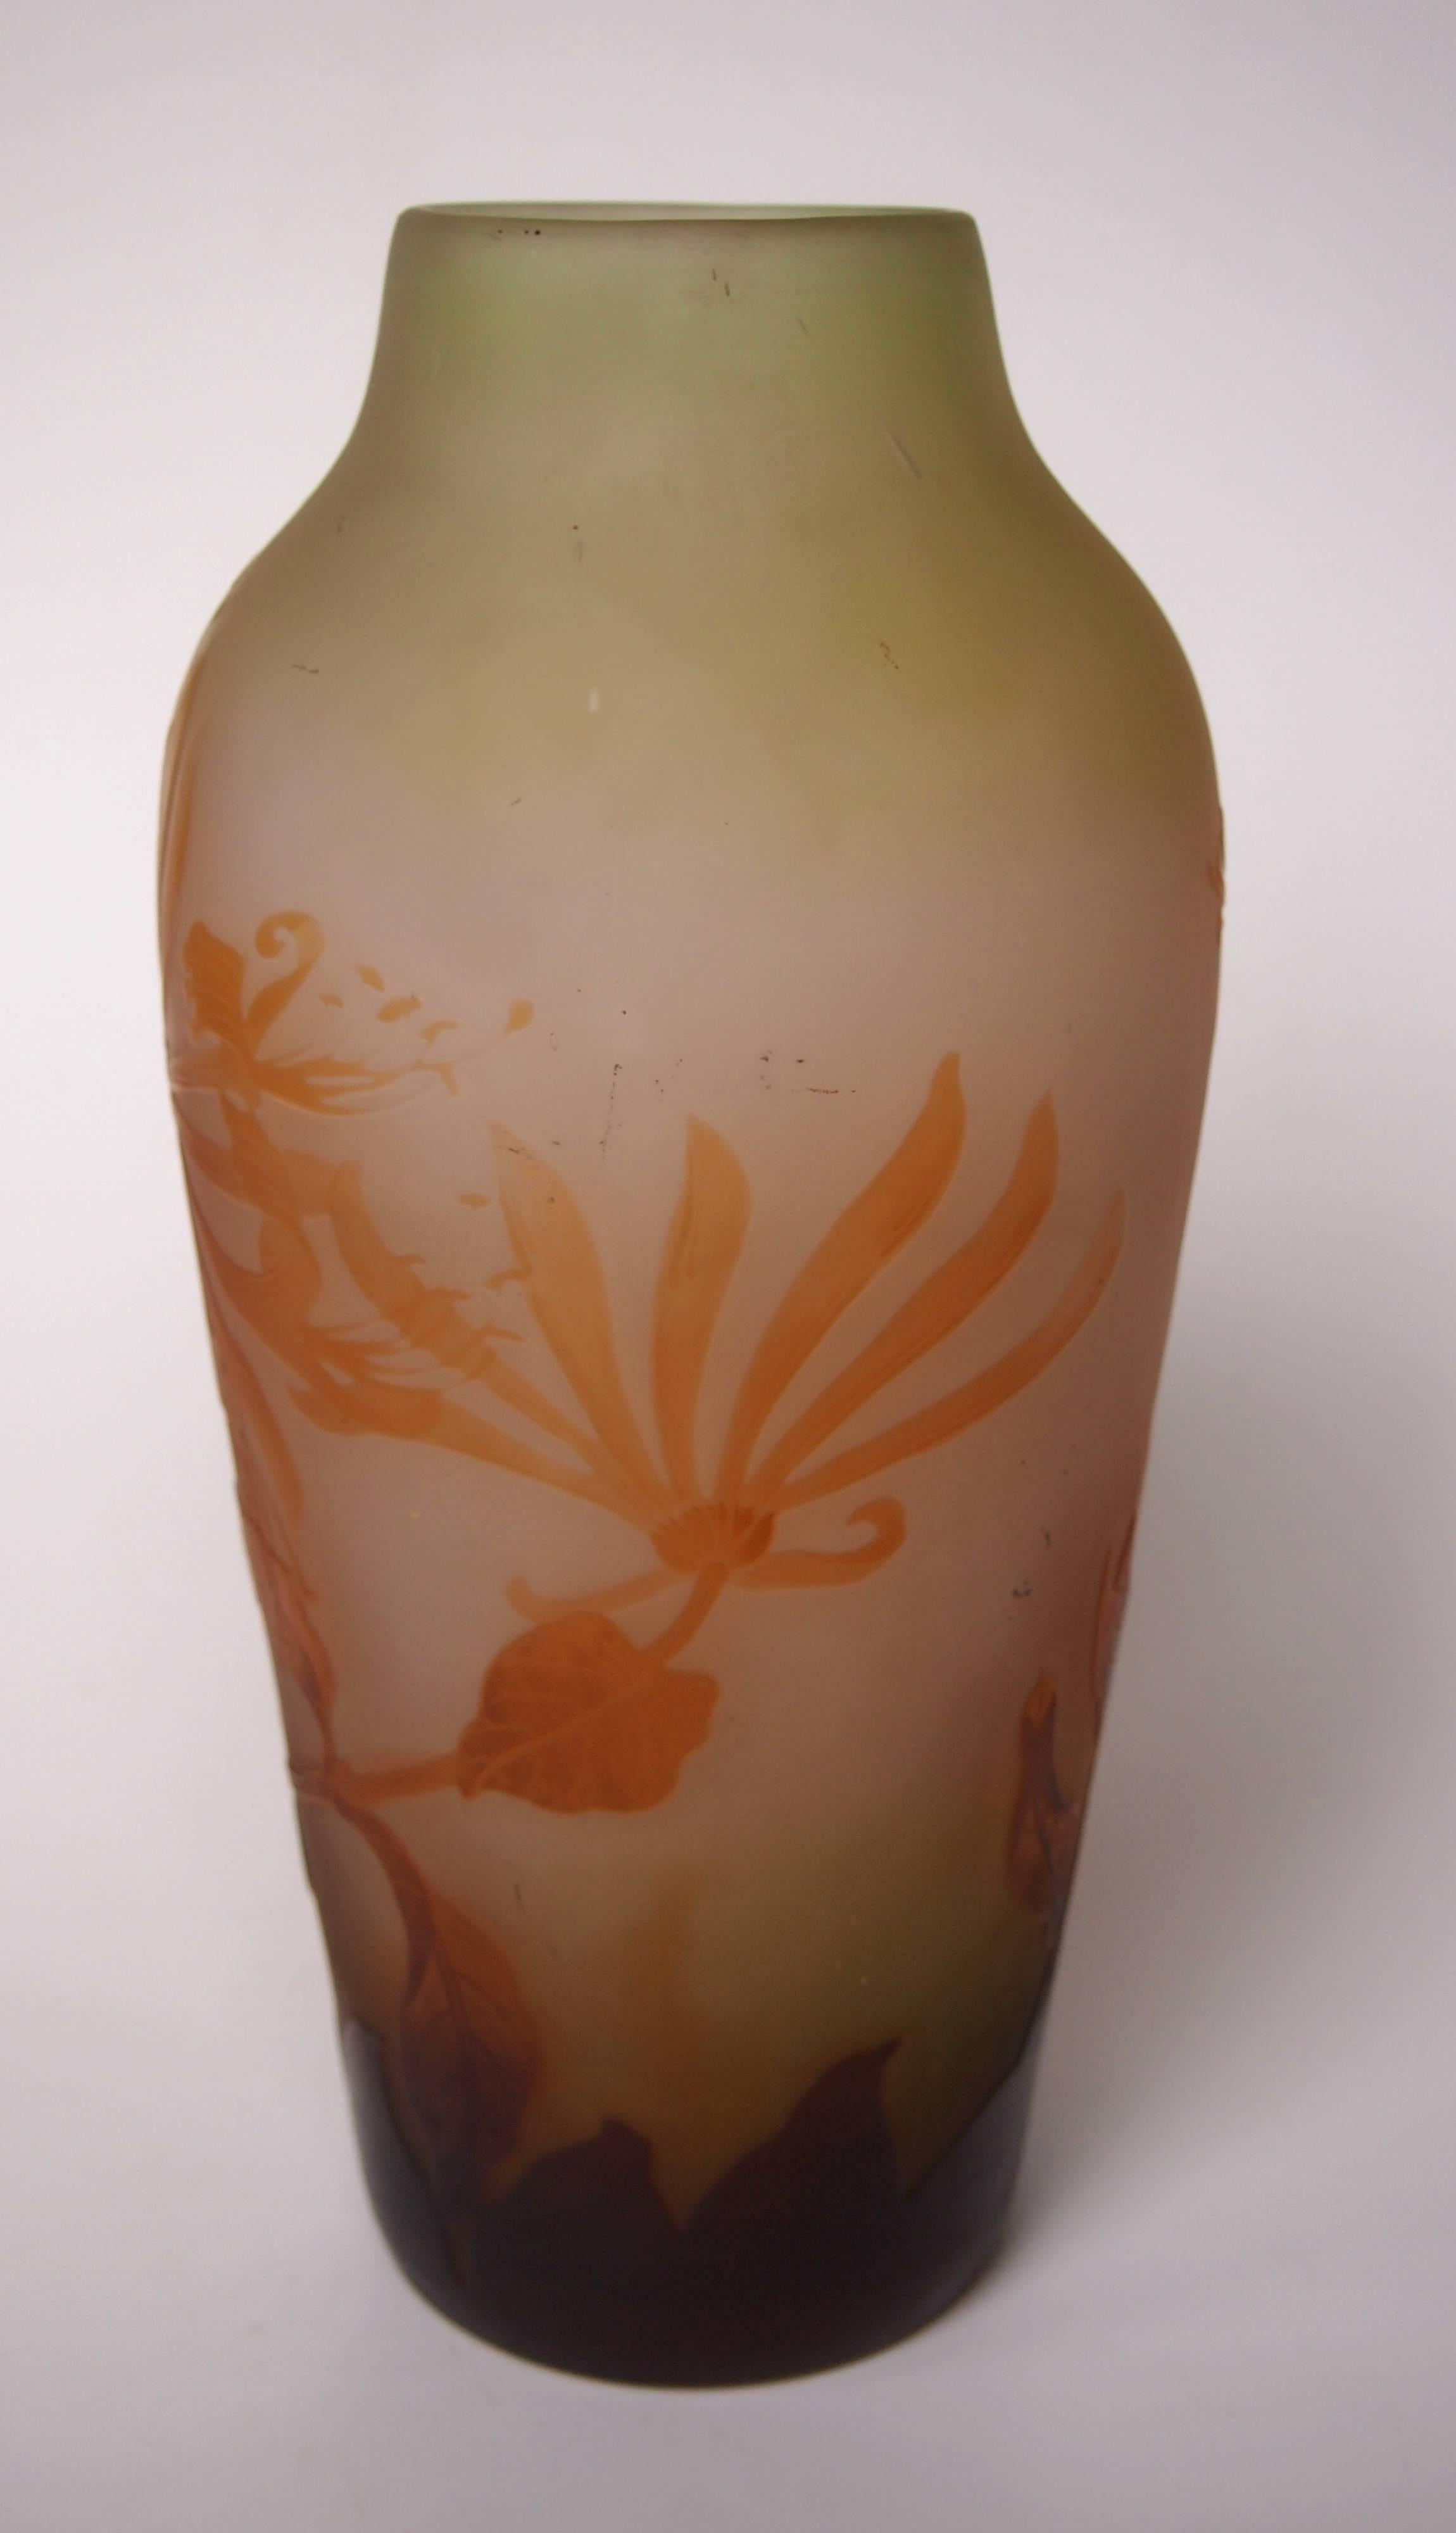 A superb Art Nouveau Emile Galle cameo vase in brown over orange, over clear with green inside. Depicting spectacularly blooming Honeysuckle a classic, but quite rare, image for Galle - signed in cameo in the orange layer. The balance of the three